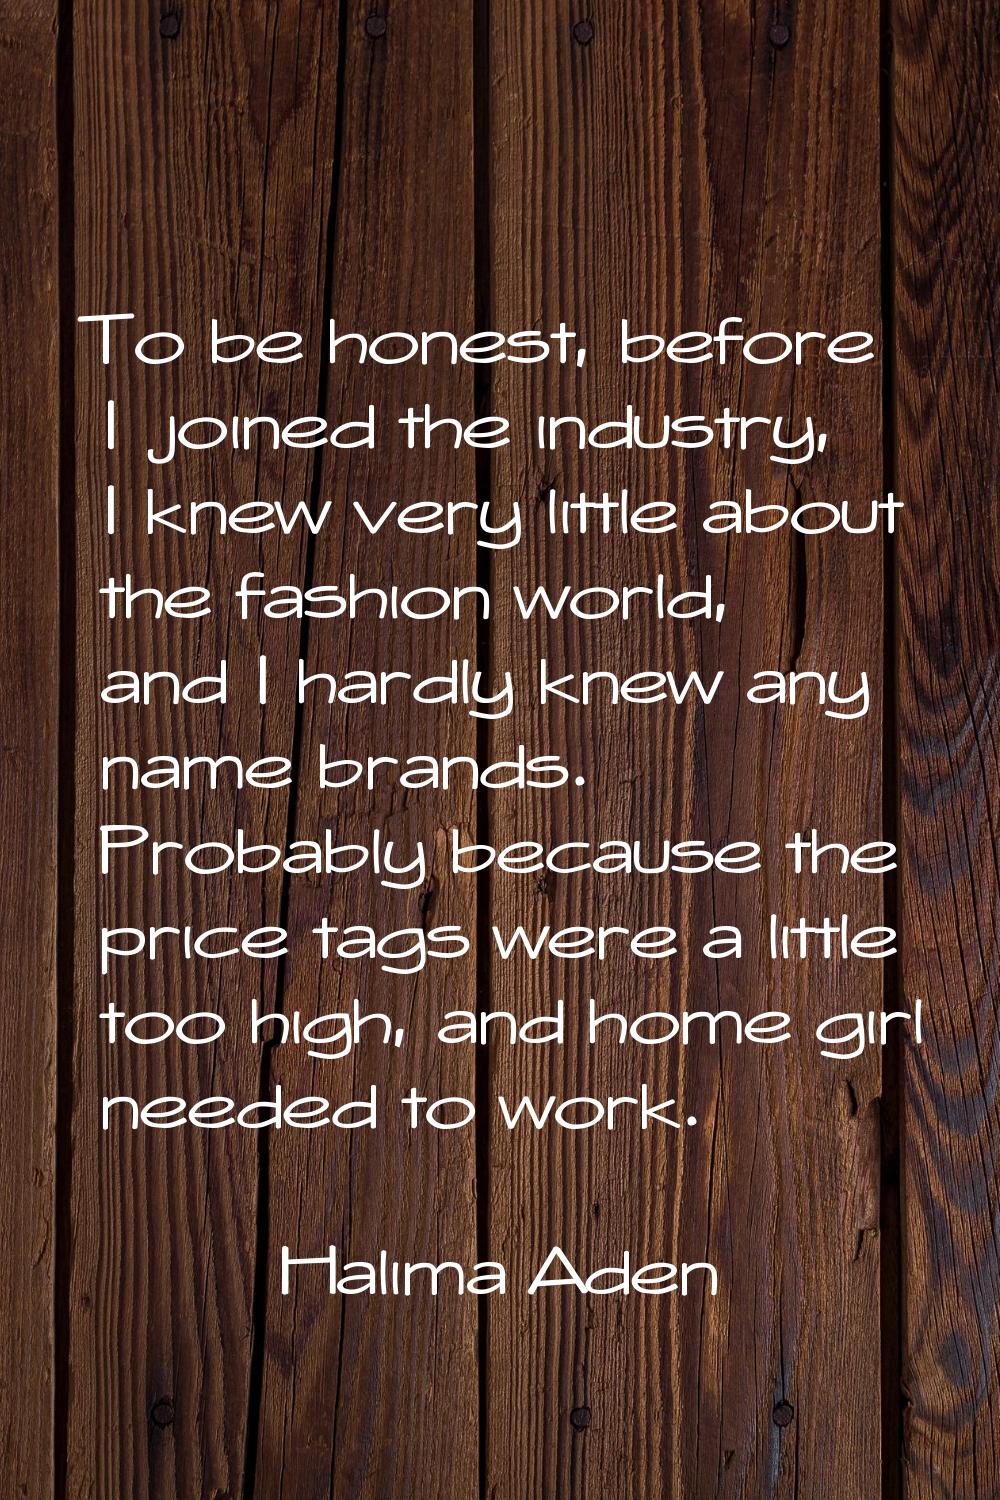 To be honest, before I joined the industry, I knew very little about the fashion world, and I hardl